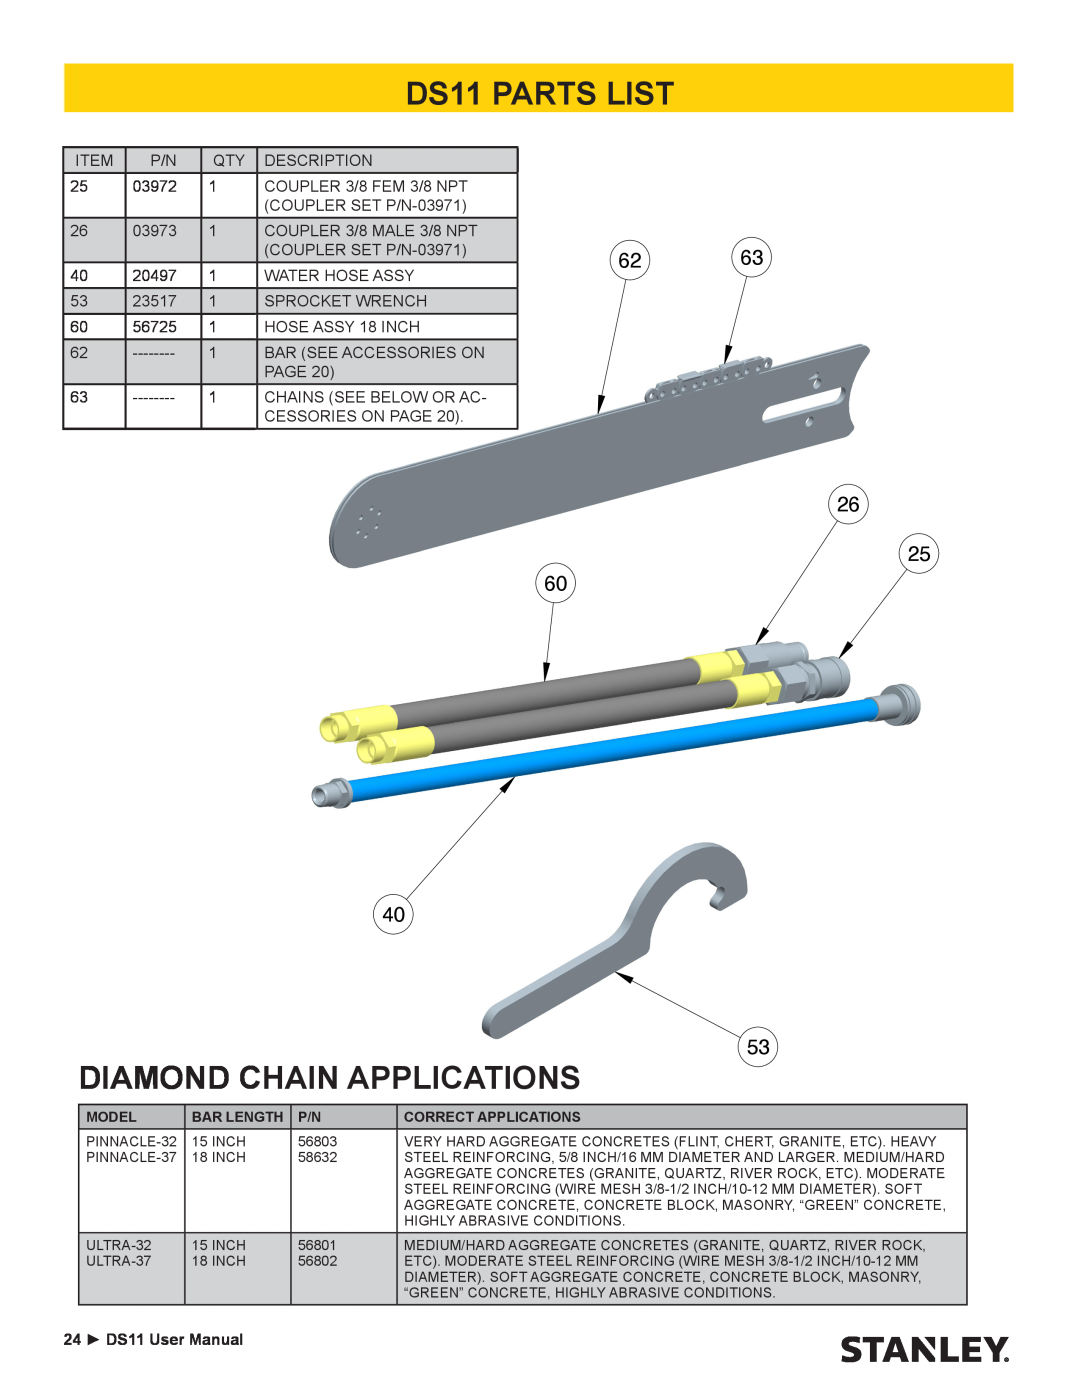 Stanley Black & Decker user manual Diamond Chain Applications, DS11 PARTS LIST, 24 DS11 User Manual 